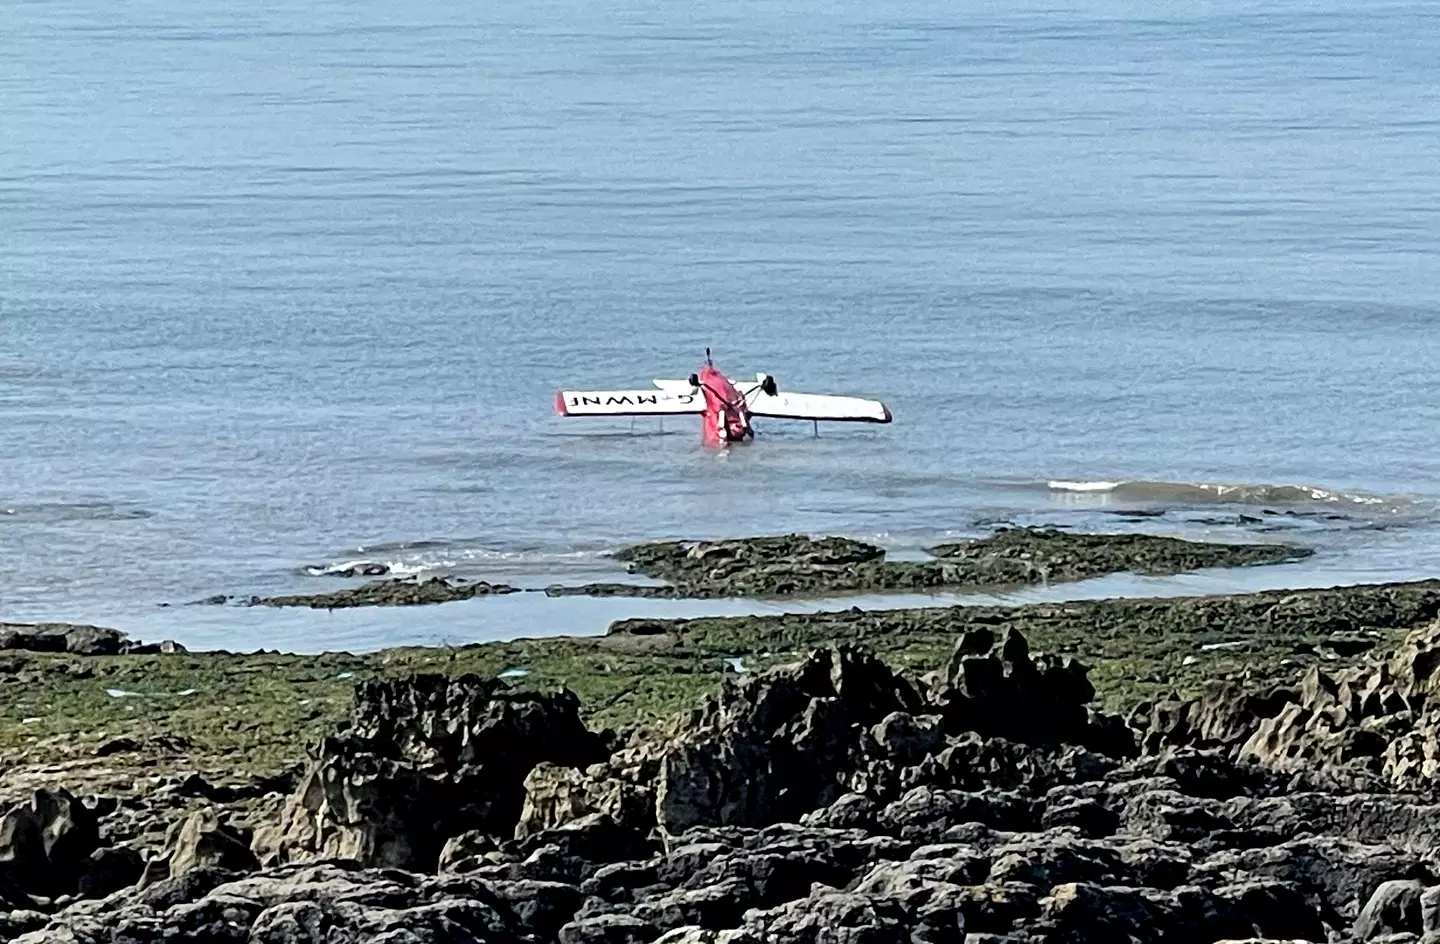 Witnesses to the crash said the pilot had a 'very near miss' after they narrowly avoided crashing onto the rocks.